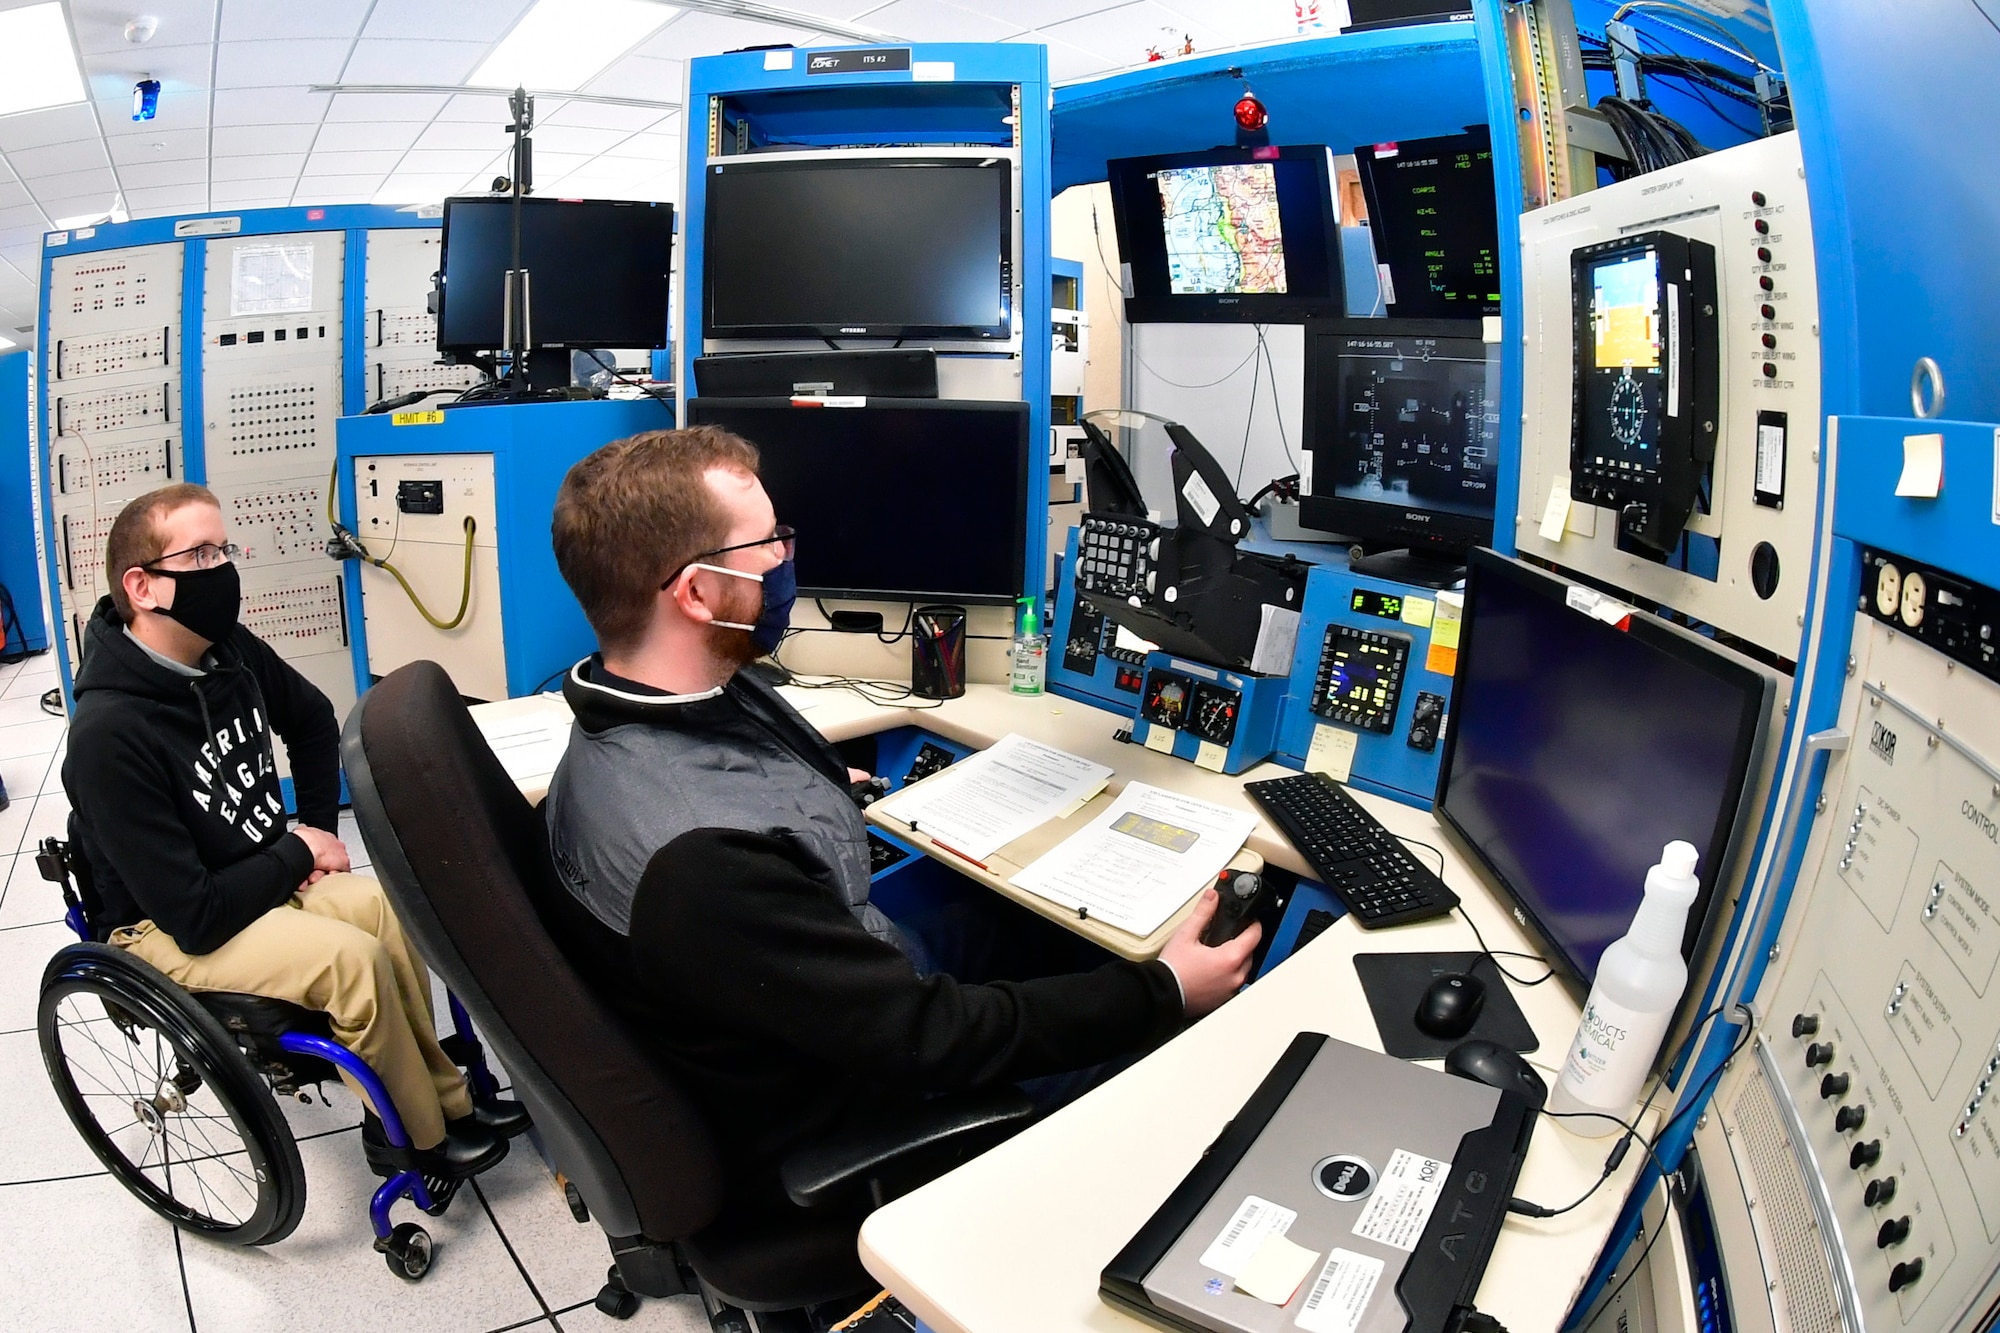 Austin Eberle and Collin Lindeman, both System Test engineers, 518 Software Engineering Squadron, preform software test and evaluation on an F-16 simulator, May 26, 2020, at Hill Air Force Base, Utah. (U.S Air Force photo by Todd Cromar)